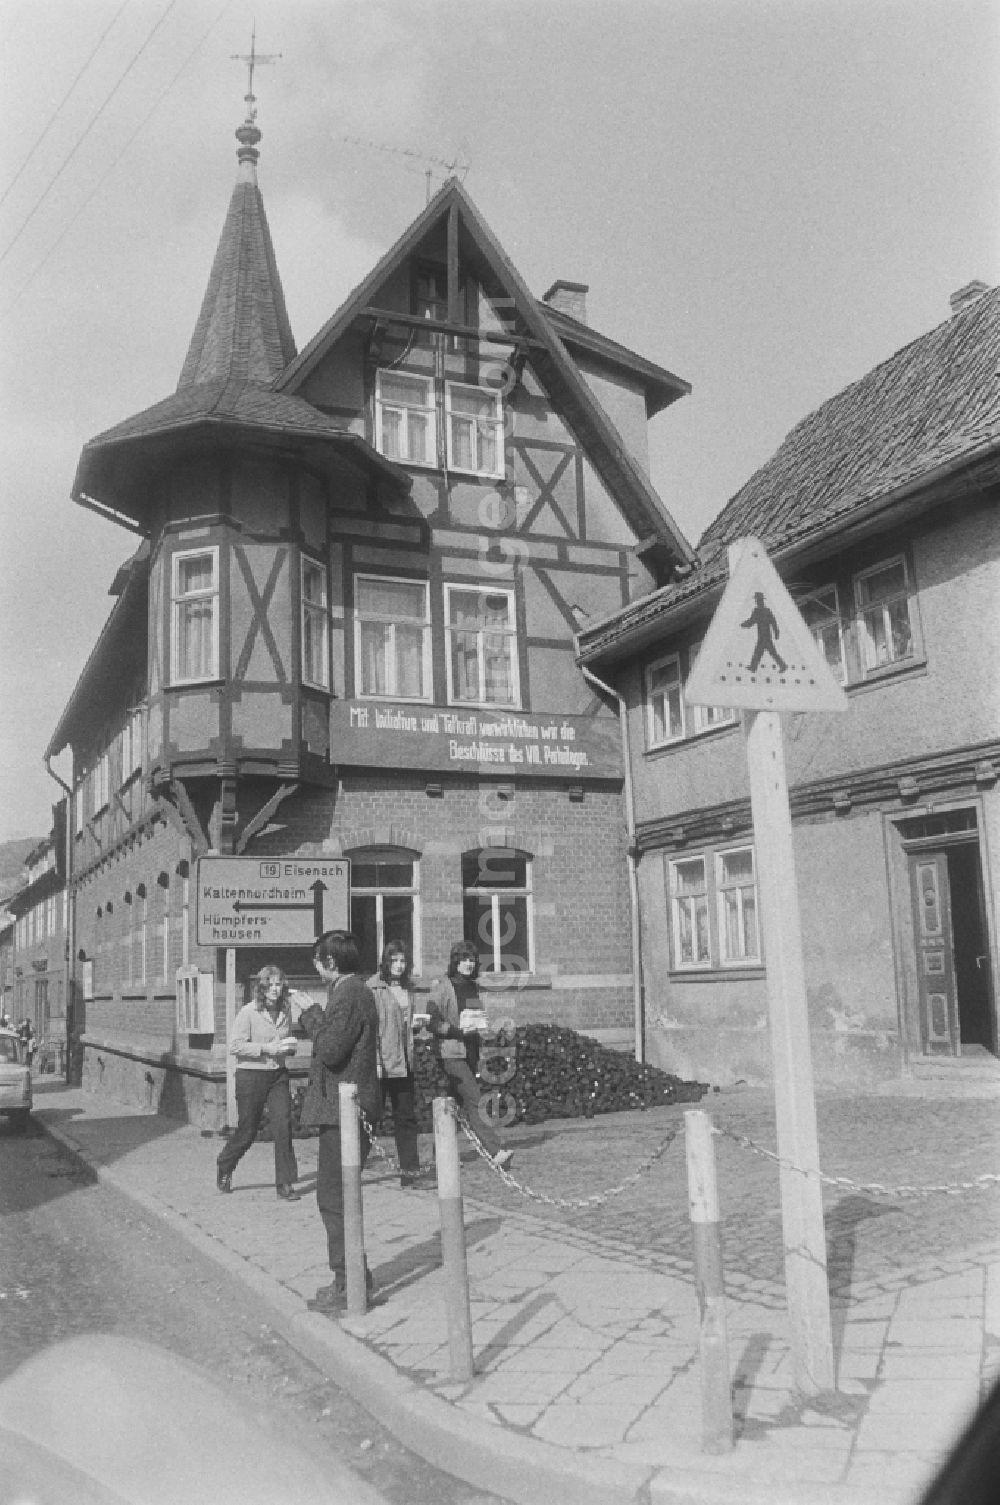 Rohr: A village called Rohr in the state Thuringia on the territory of the former GDR, German Democratic Republic